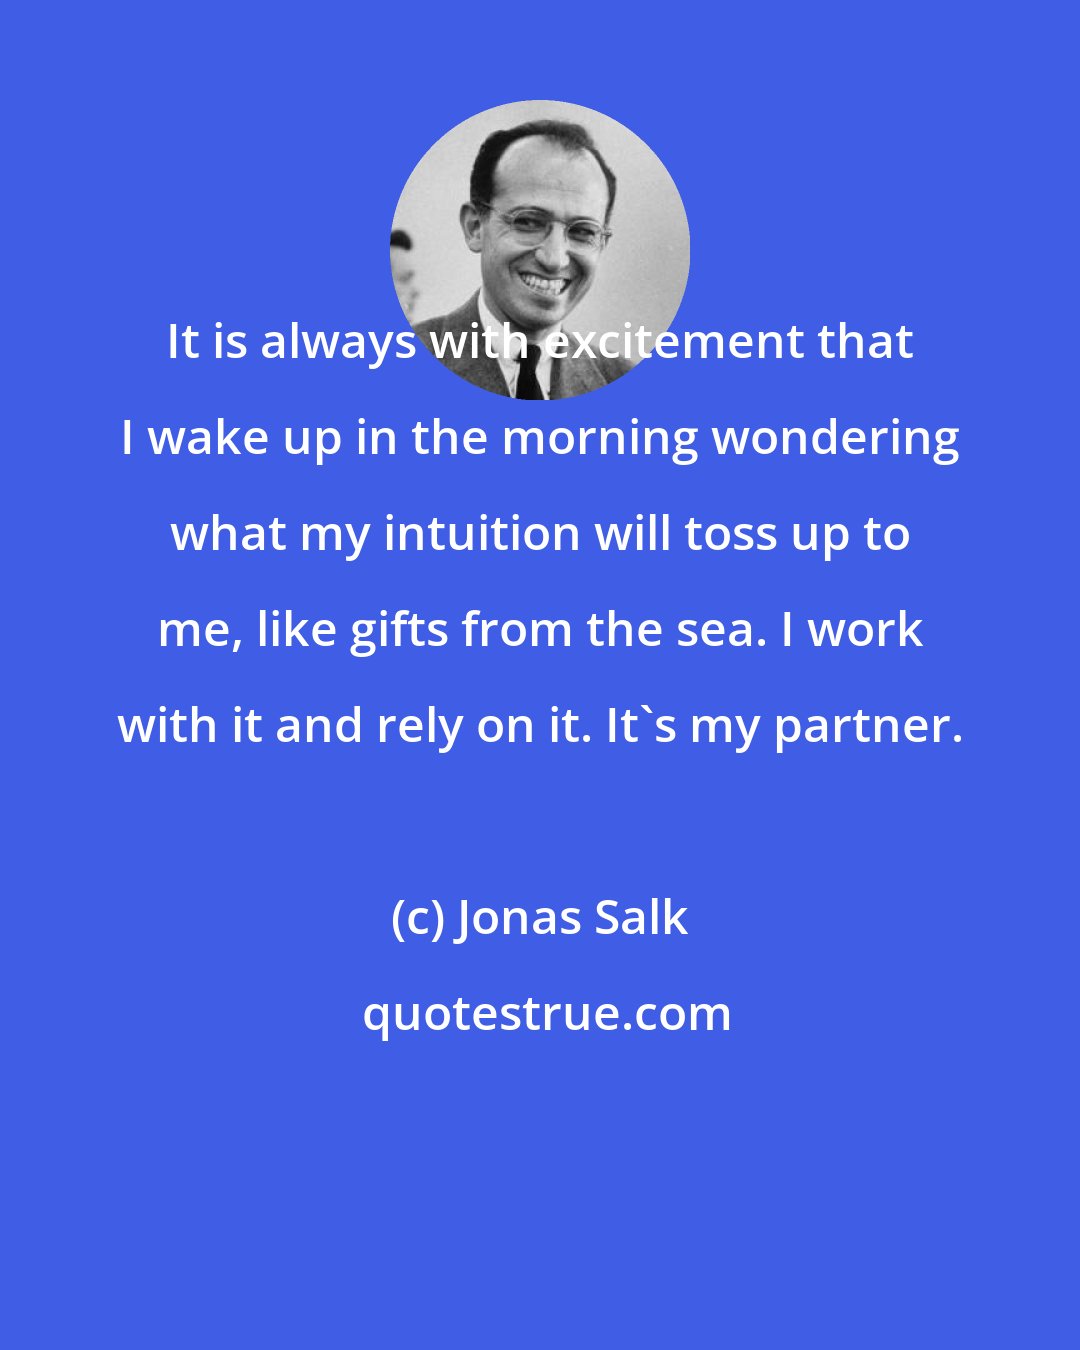 Jonas Salk: It is always with excitement that I wake up in the morning wondering what my intuition will toss up to me, like gifts from the sea. I work with it and rely on it. It's my partner.